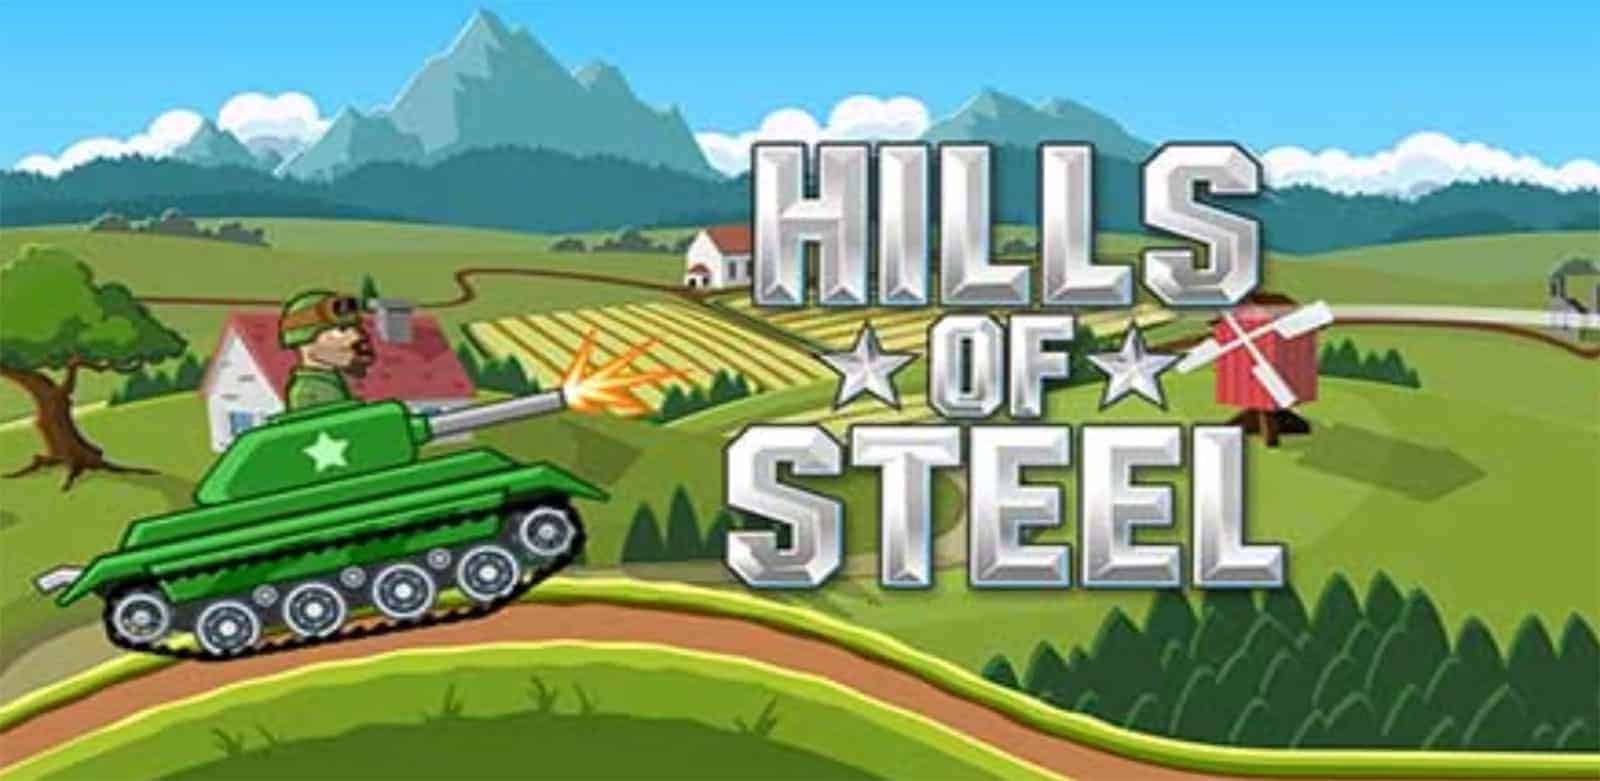 Hills of Steel MOD APK Unlimited Gems and Money Latest version 